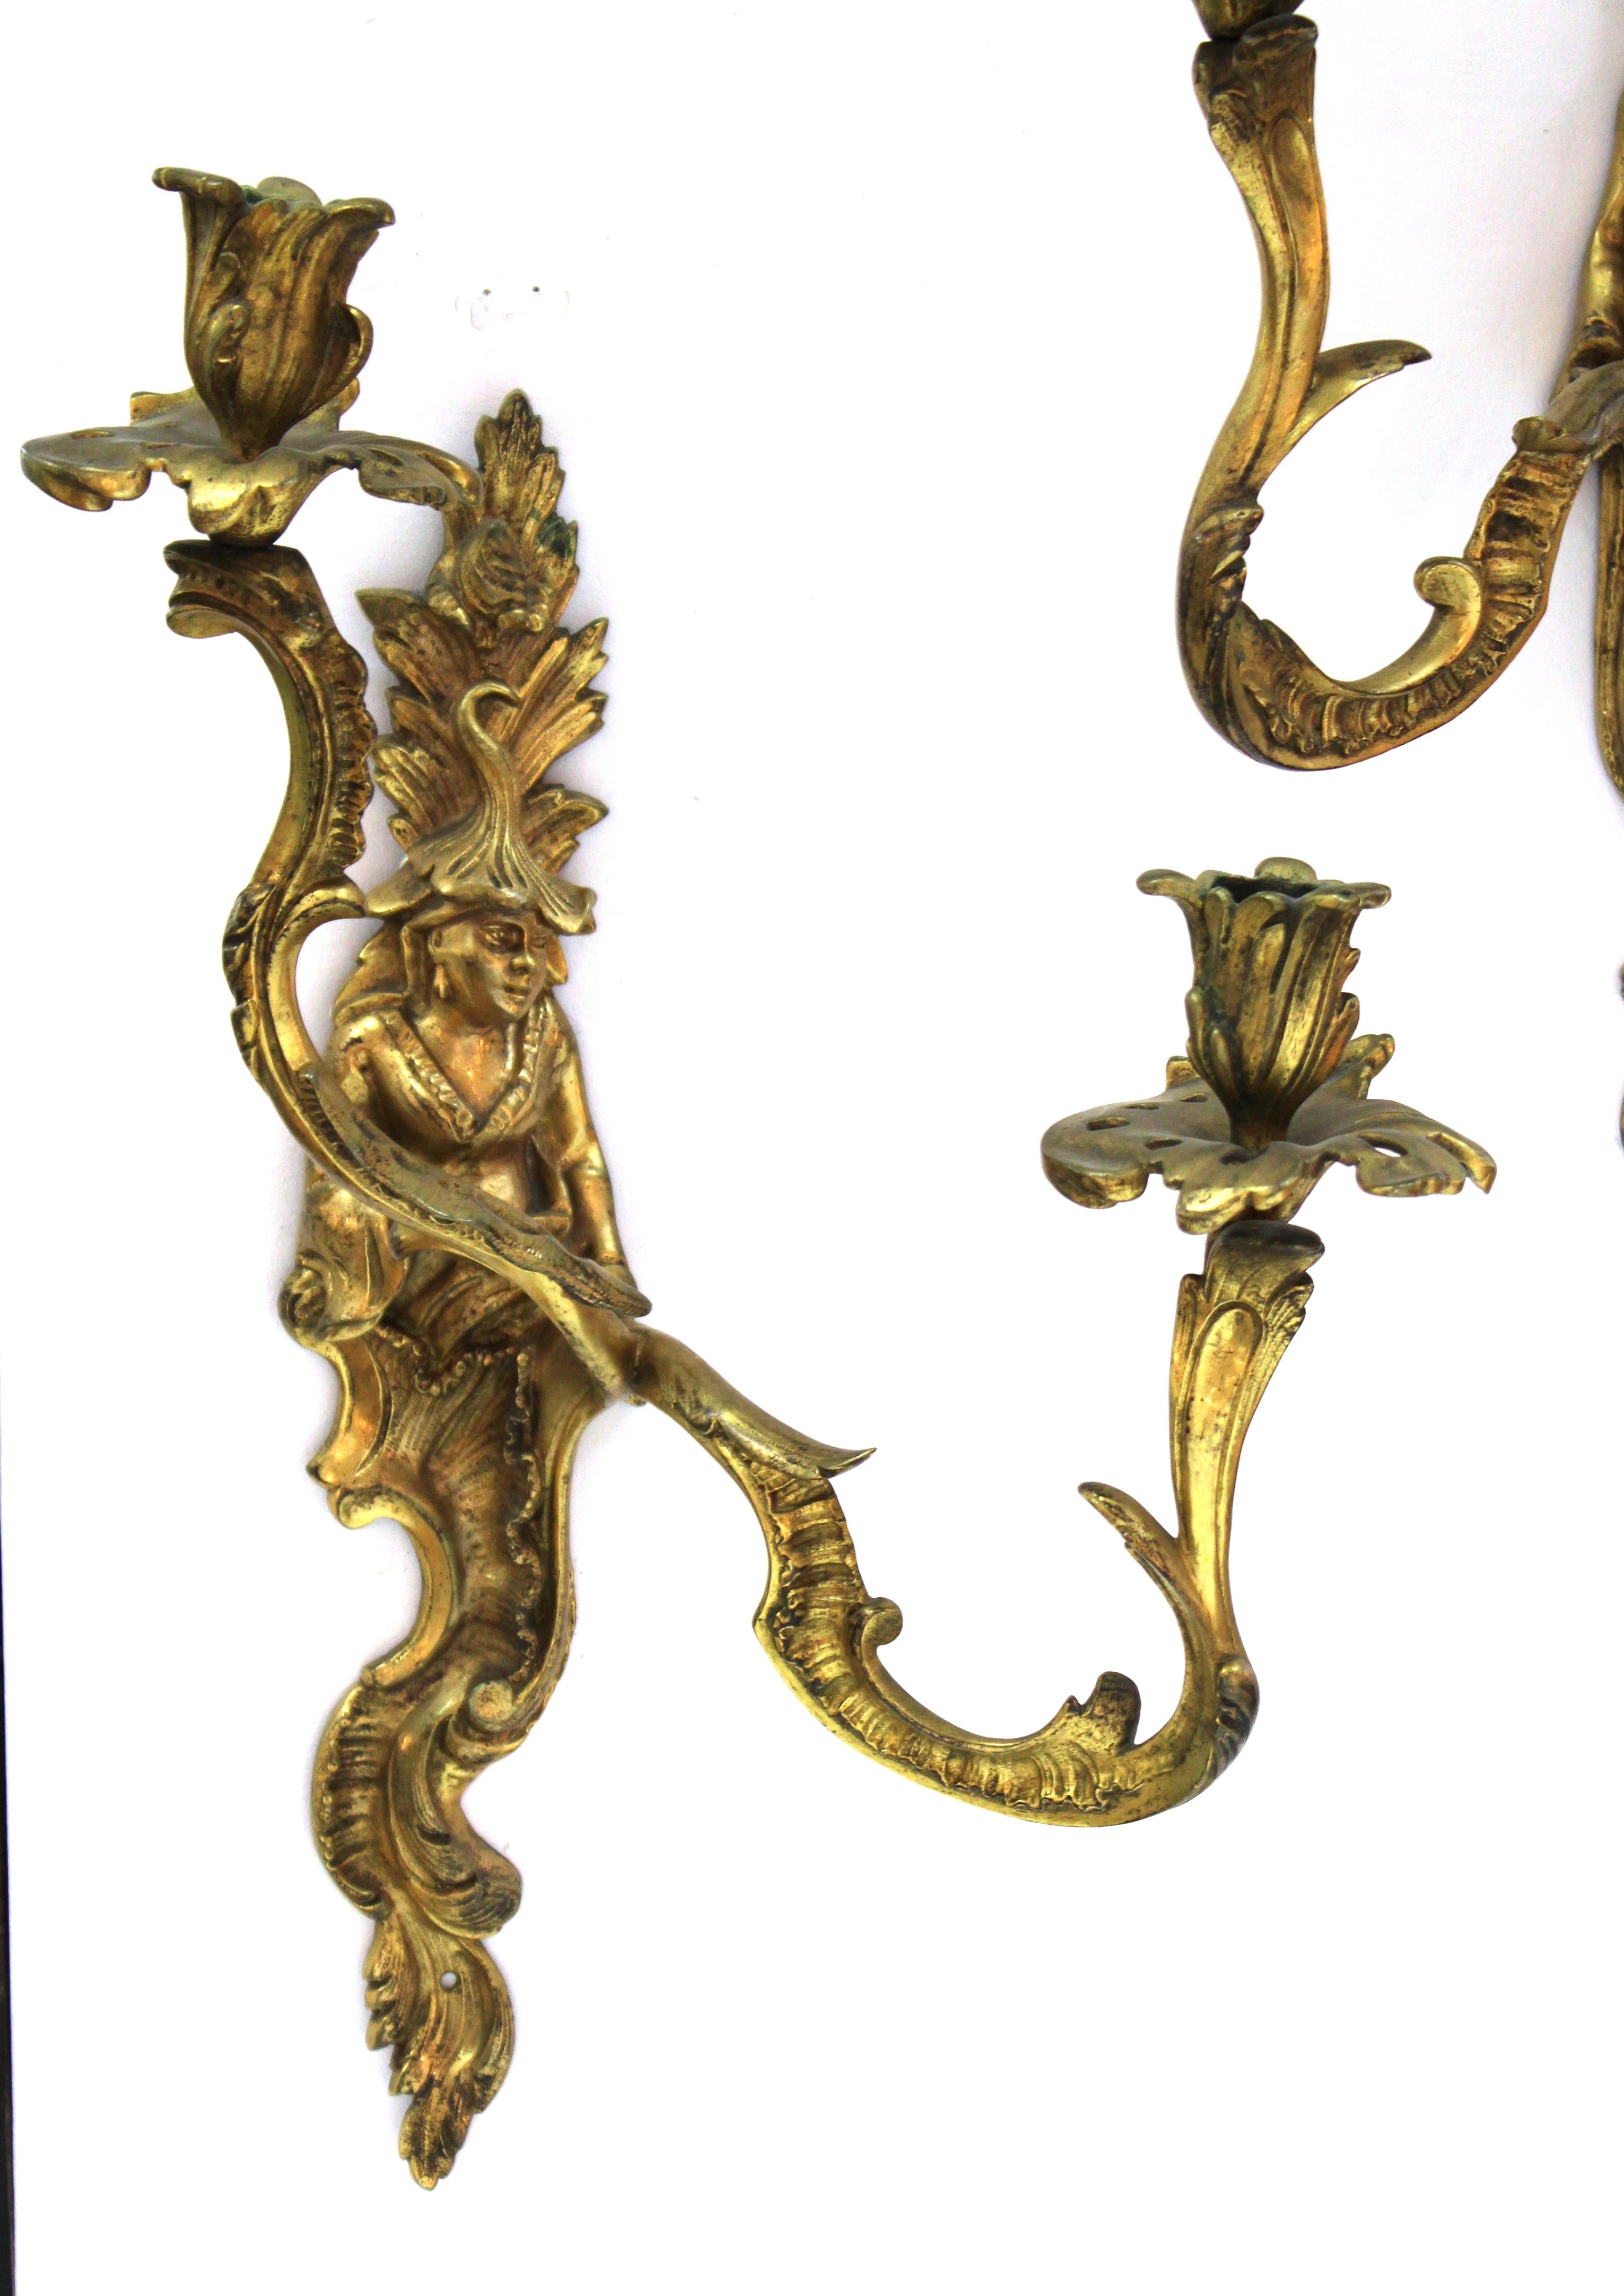 Chinese Chippendale style pair of bronze wall sconces with chinoiserie figures on the back plates. Elaborate foliage and a pair of rocaille arms complete each sconce. Made in the 19th century, the pair is in great antique condition with